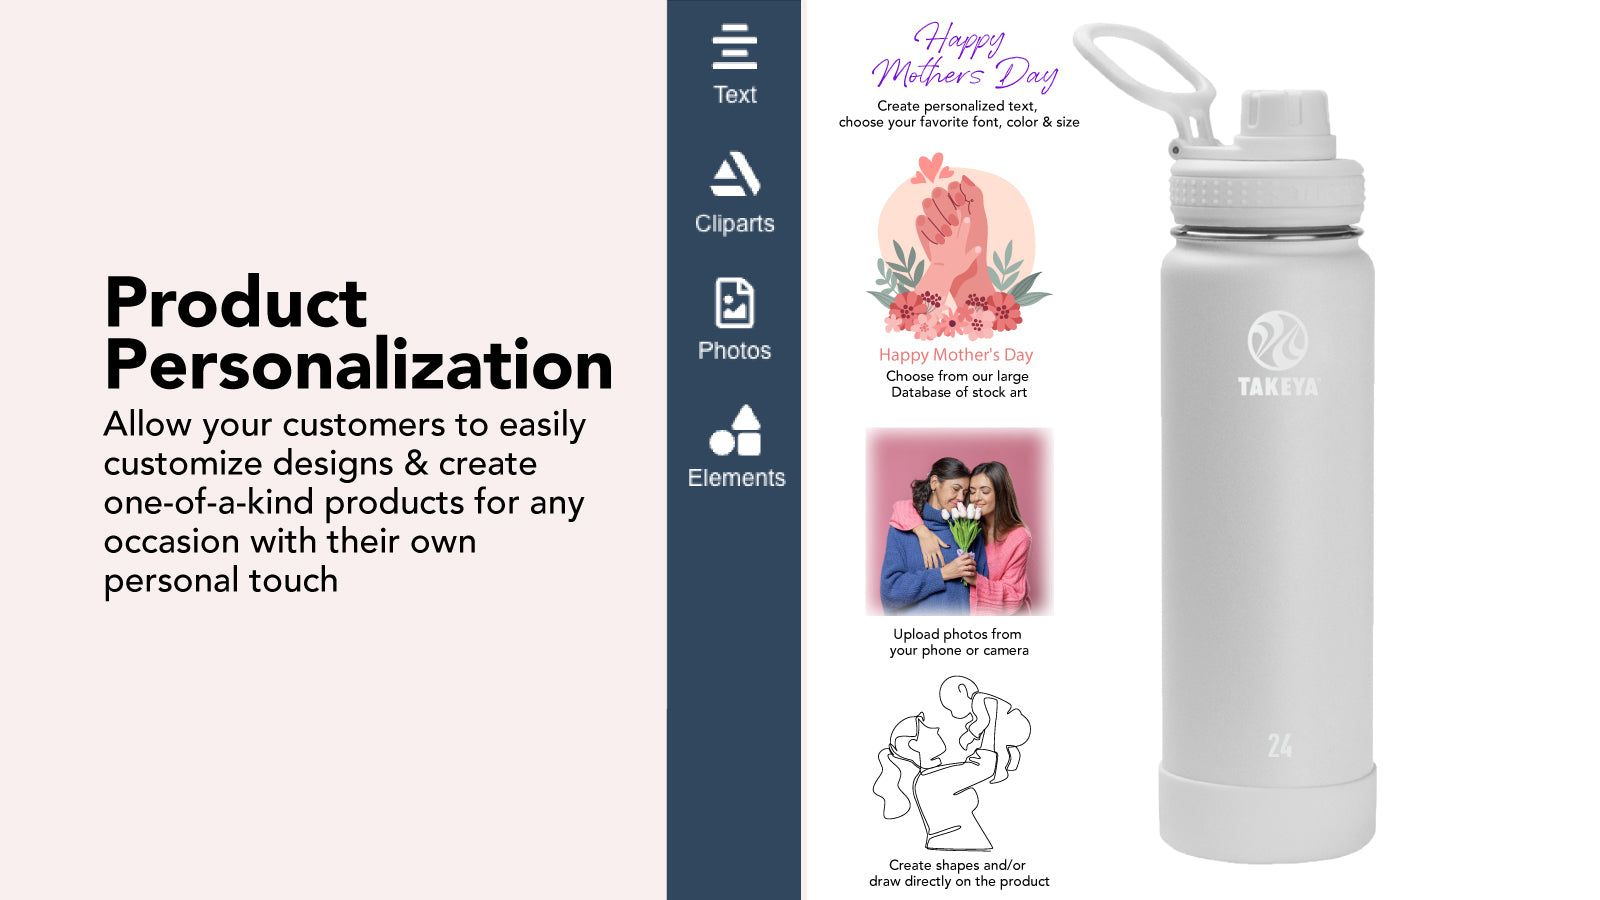 Personalized by your customer 